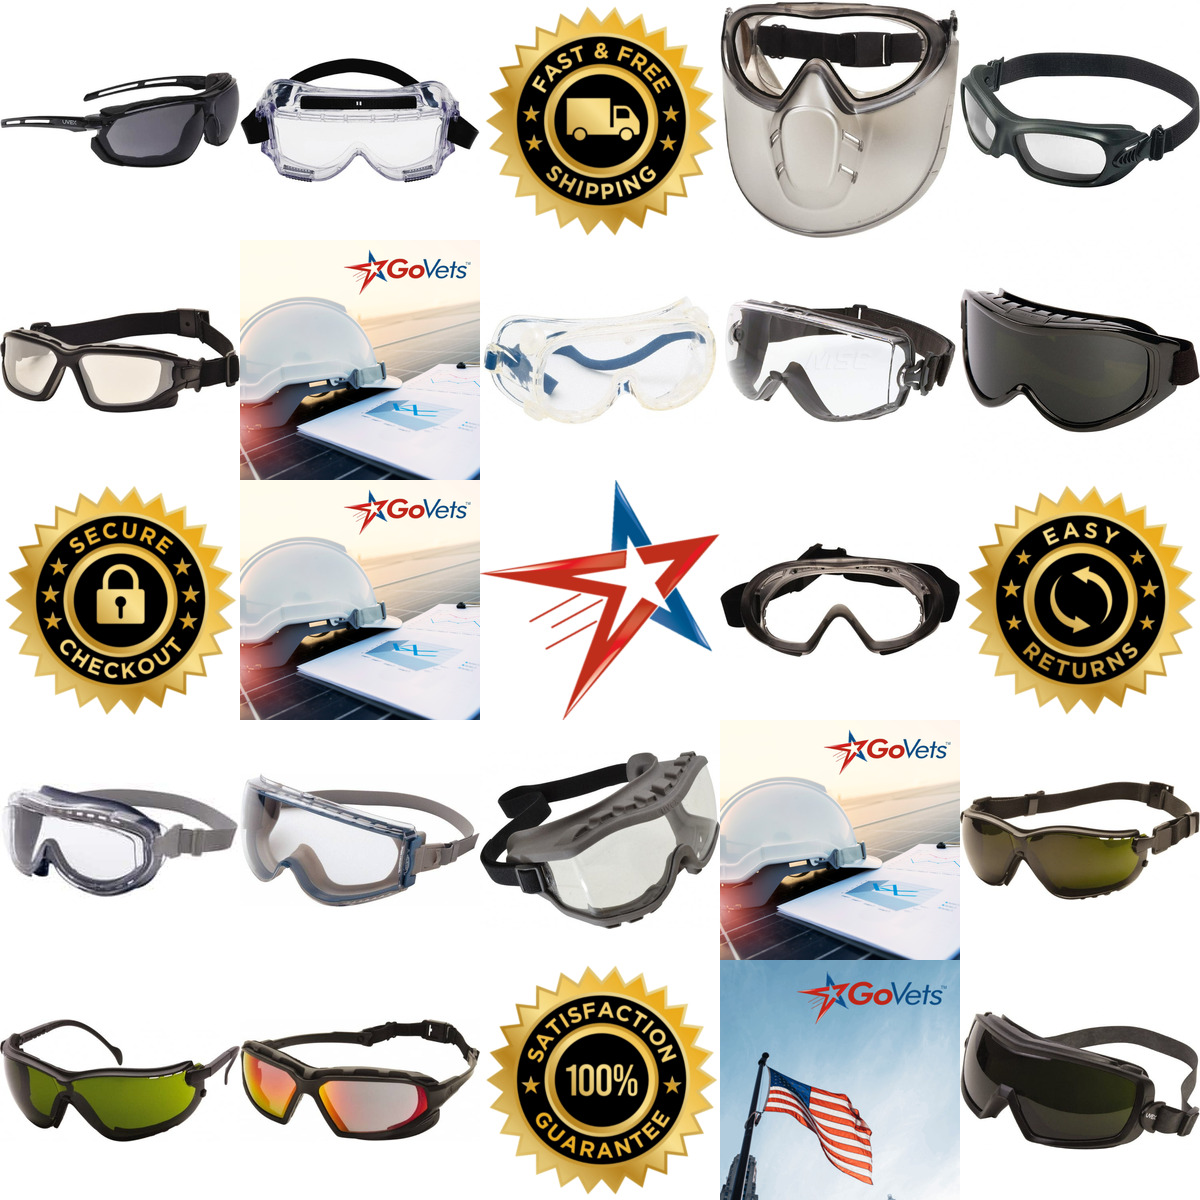 A selection of Safety Goggles and Replacement Lenses products on GoVets